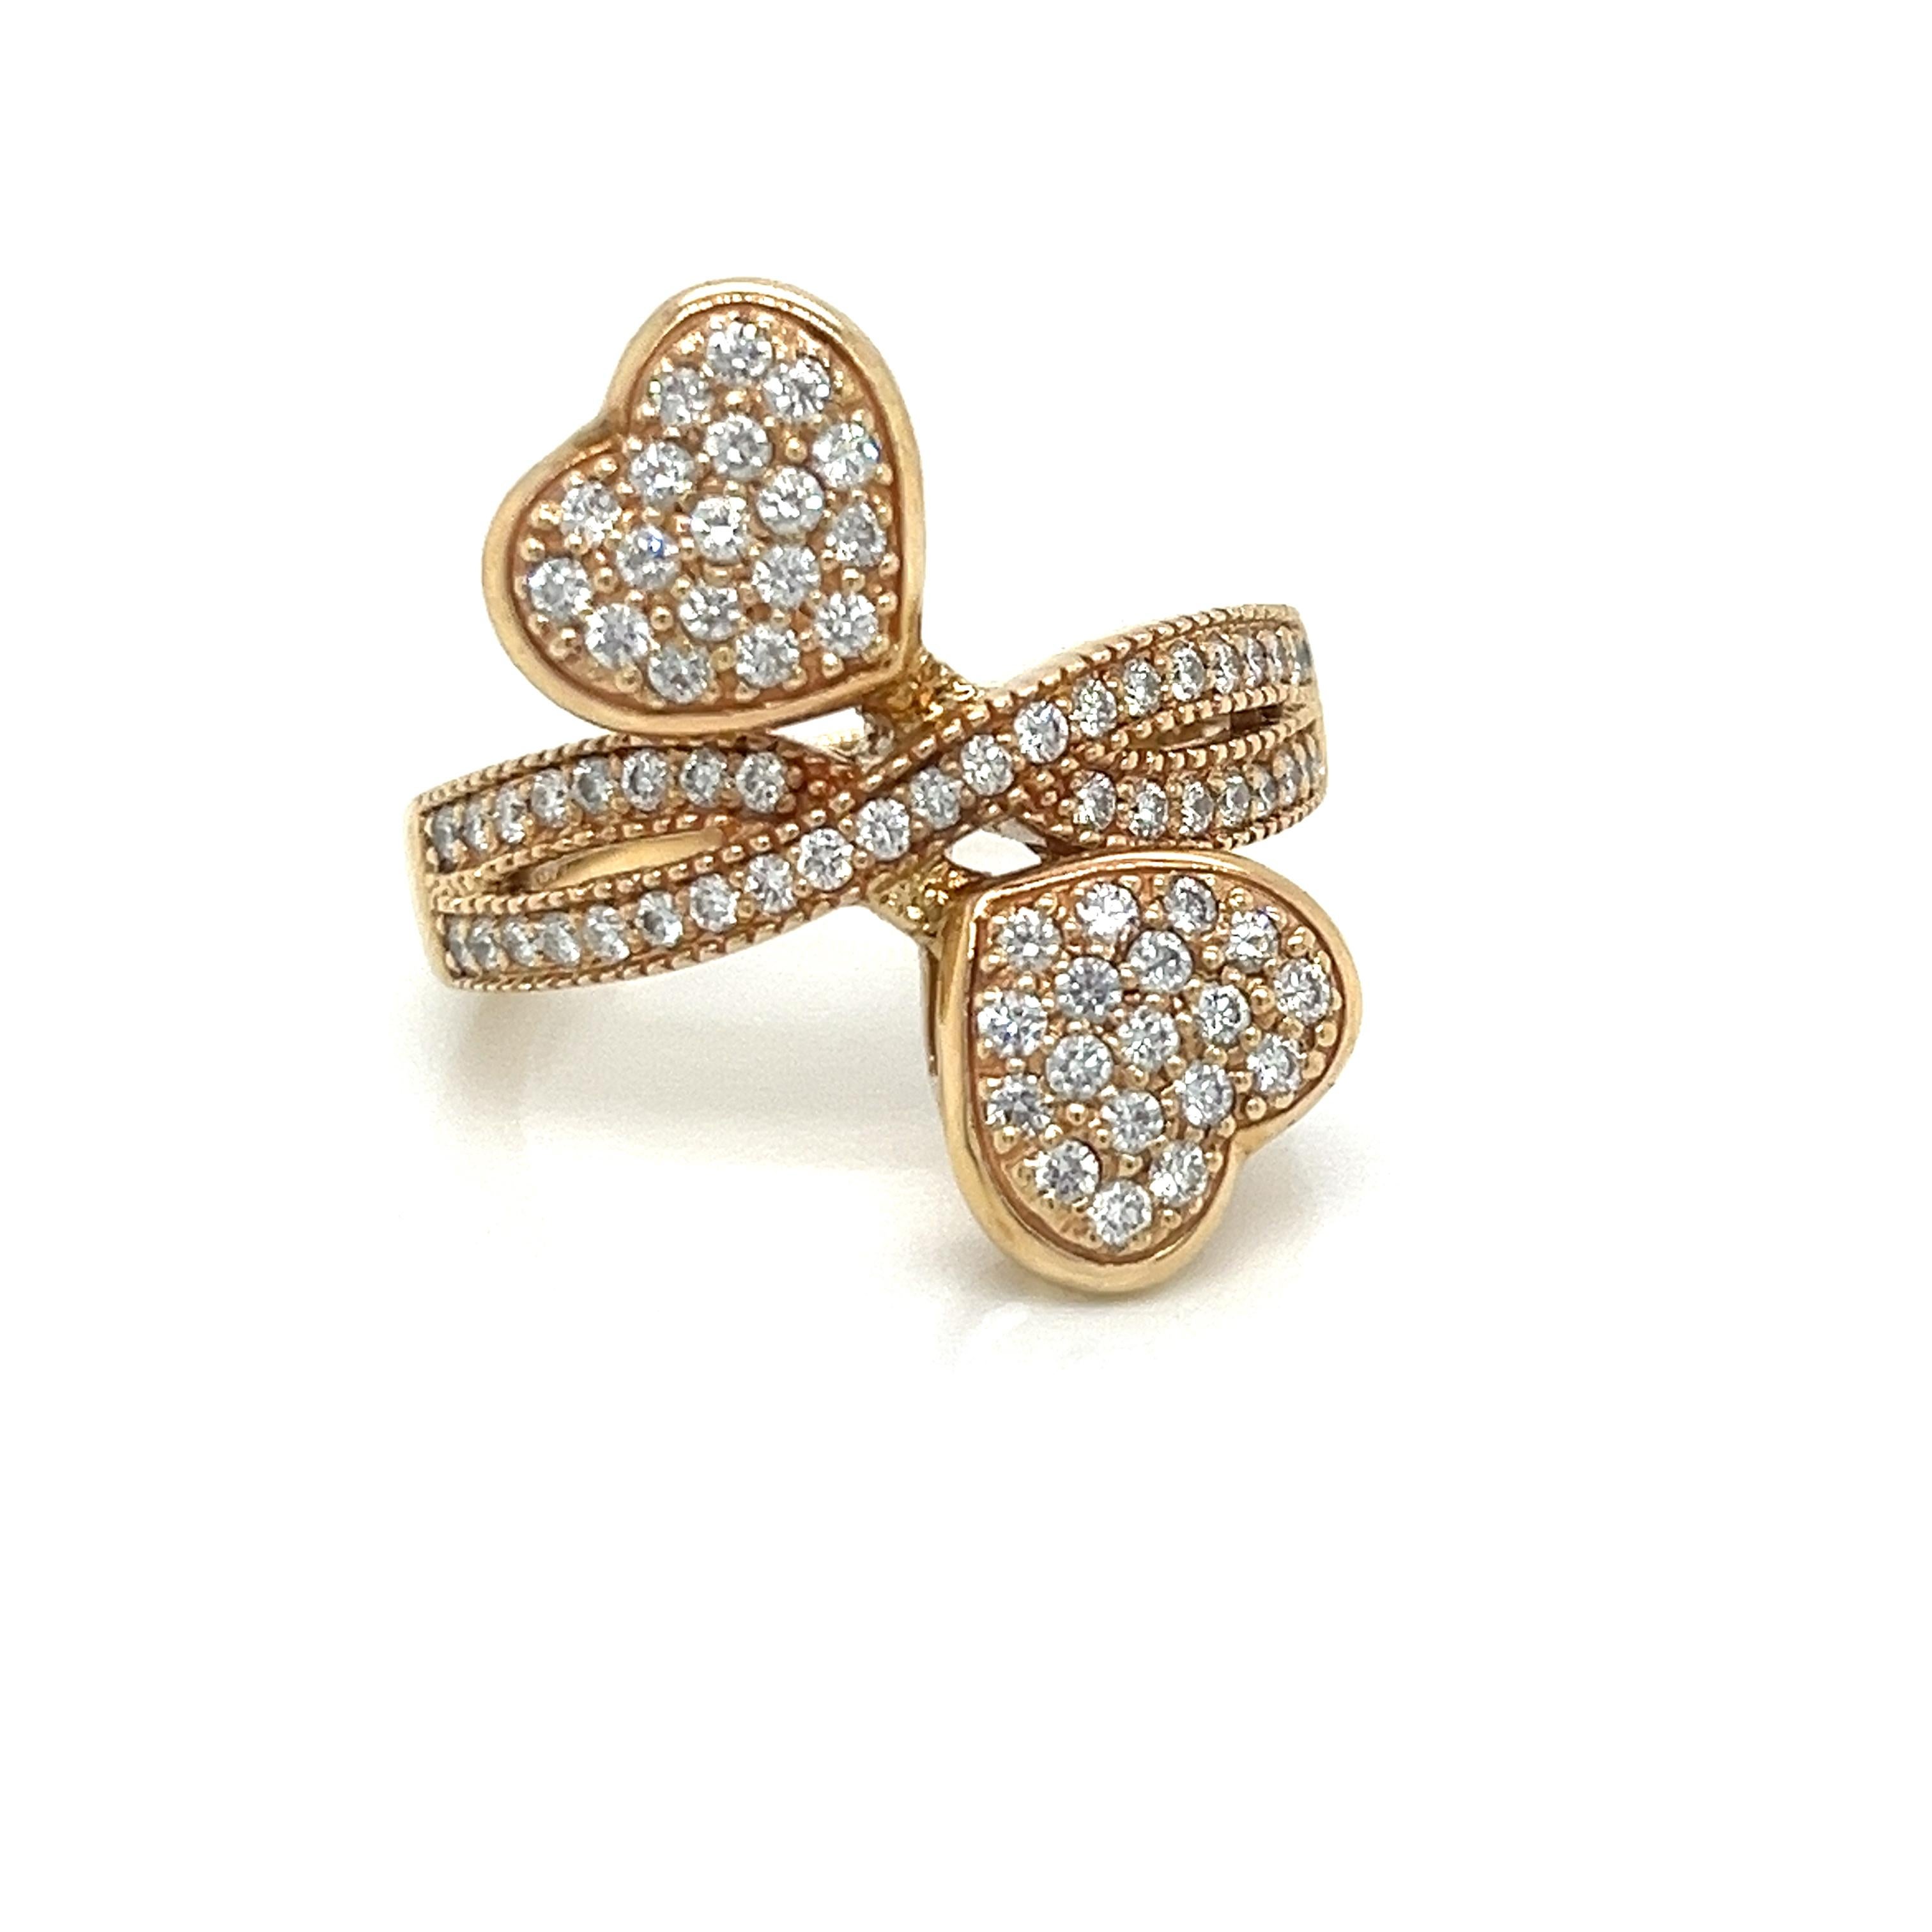 This stunning 14k yellow gold ring features a beautiful bypass design with two pave-set diamond hearts. Each heart measures 11mm wide and 10mm tall, exquisitely adorned with 18 brilliant-cut pave diamonds for a total of 36 dazzling diamonds weighing